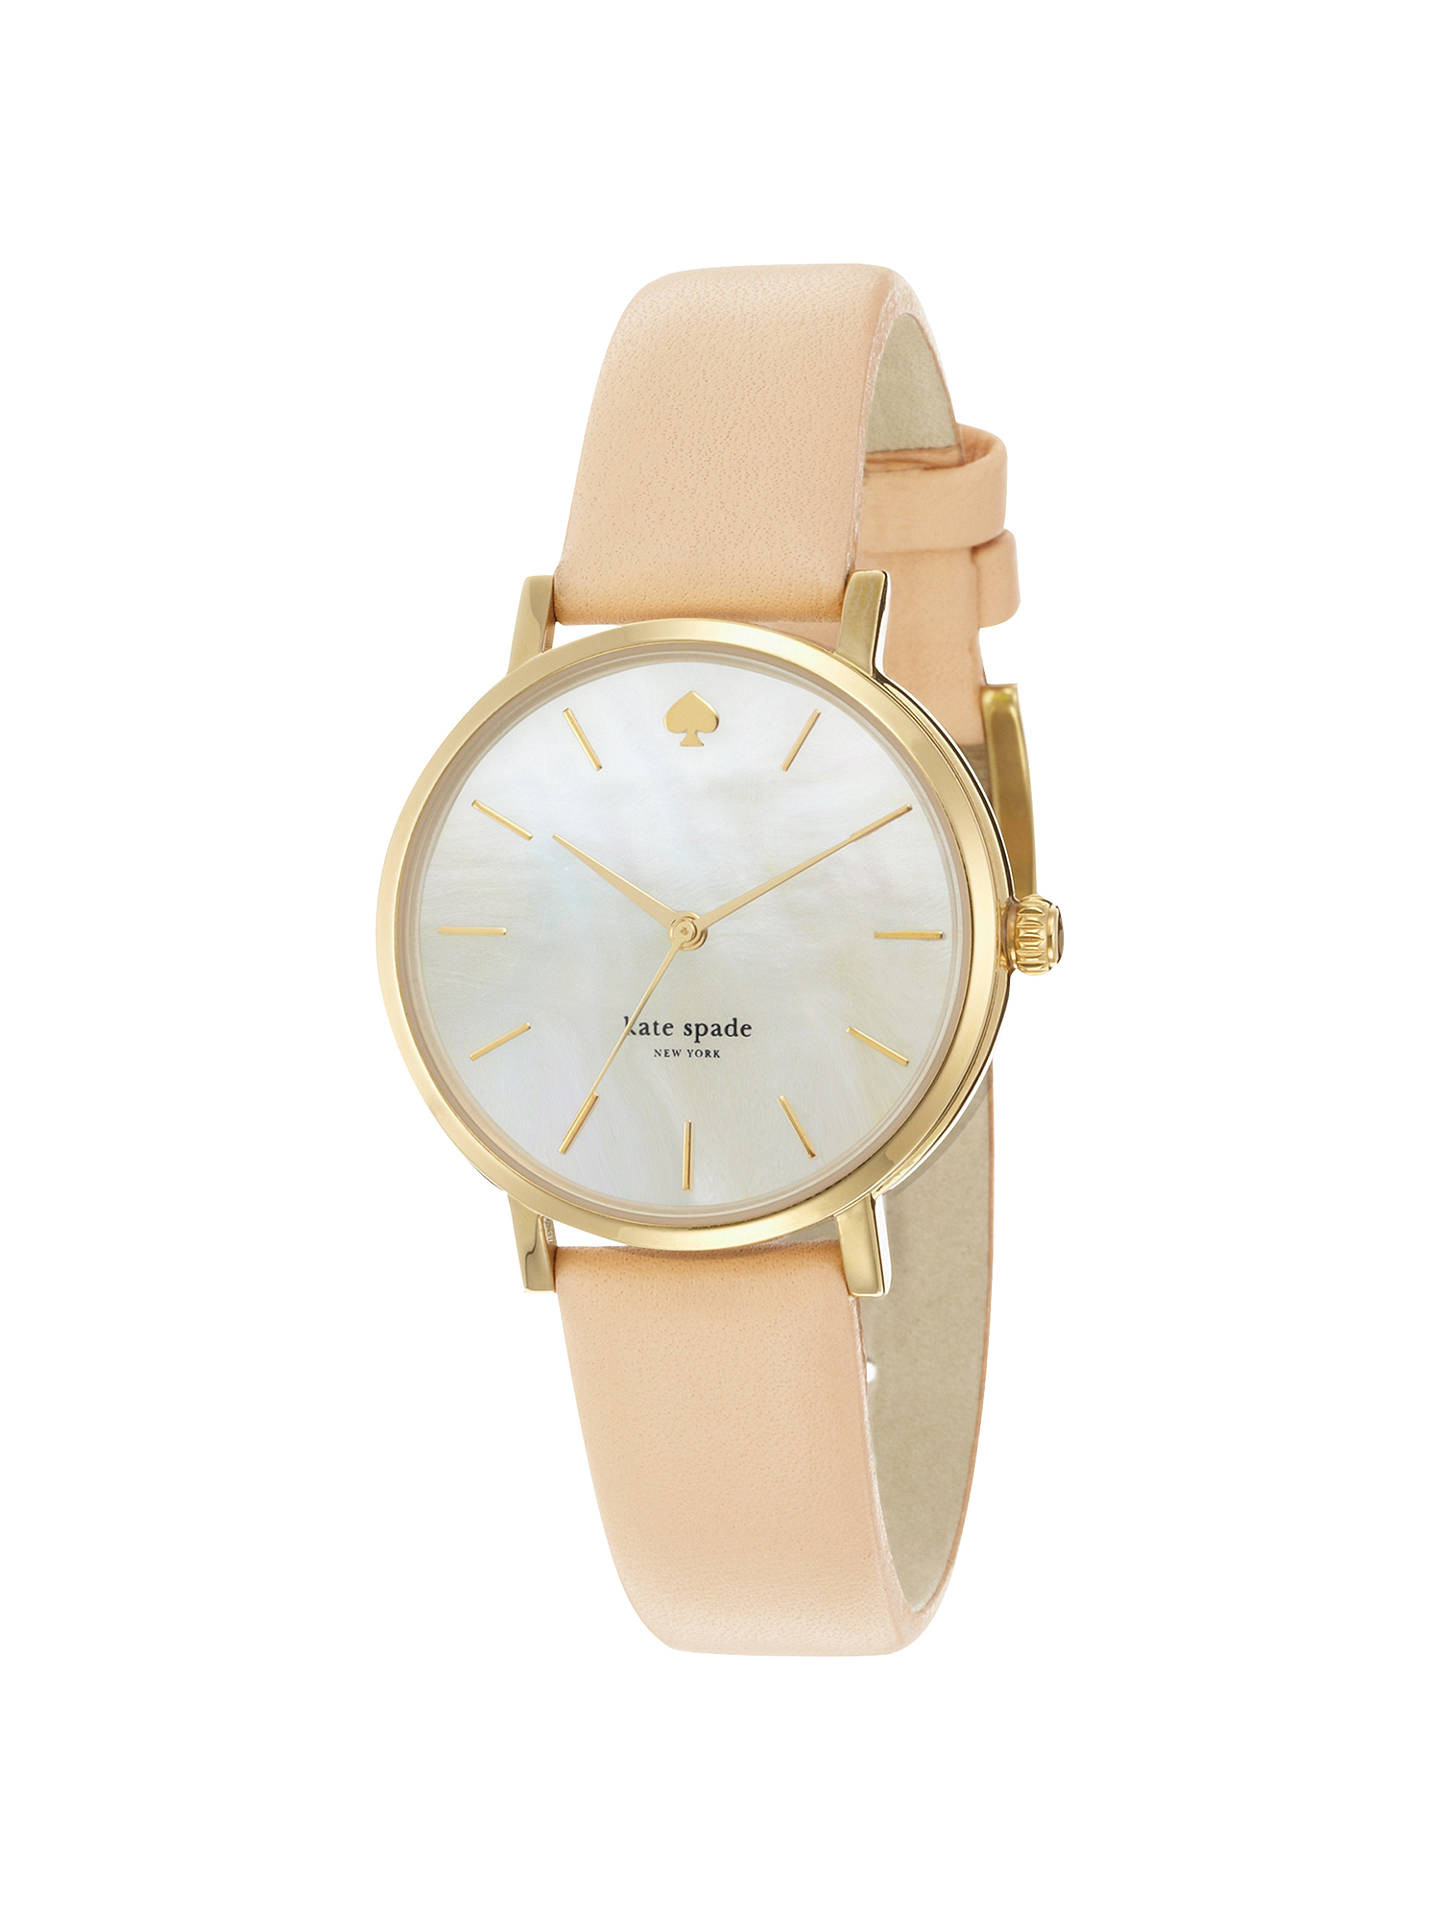 12 attractive Kate Spade New York Pearl Place Vase 2024 free download kate spade new york pearl place vase of kate spade new york womens metro leather strap watch at john lewis with buykate spade new york 1yru0073 womens metro leather strap watch nude silver m